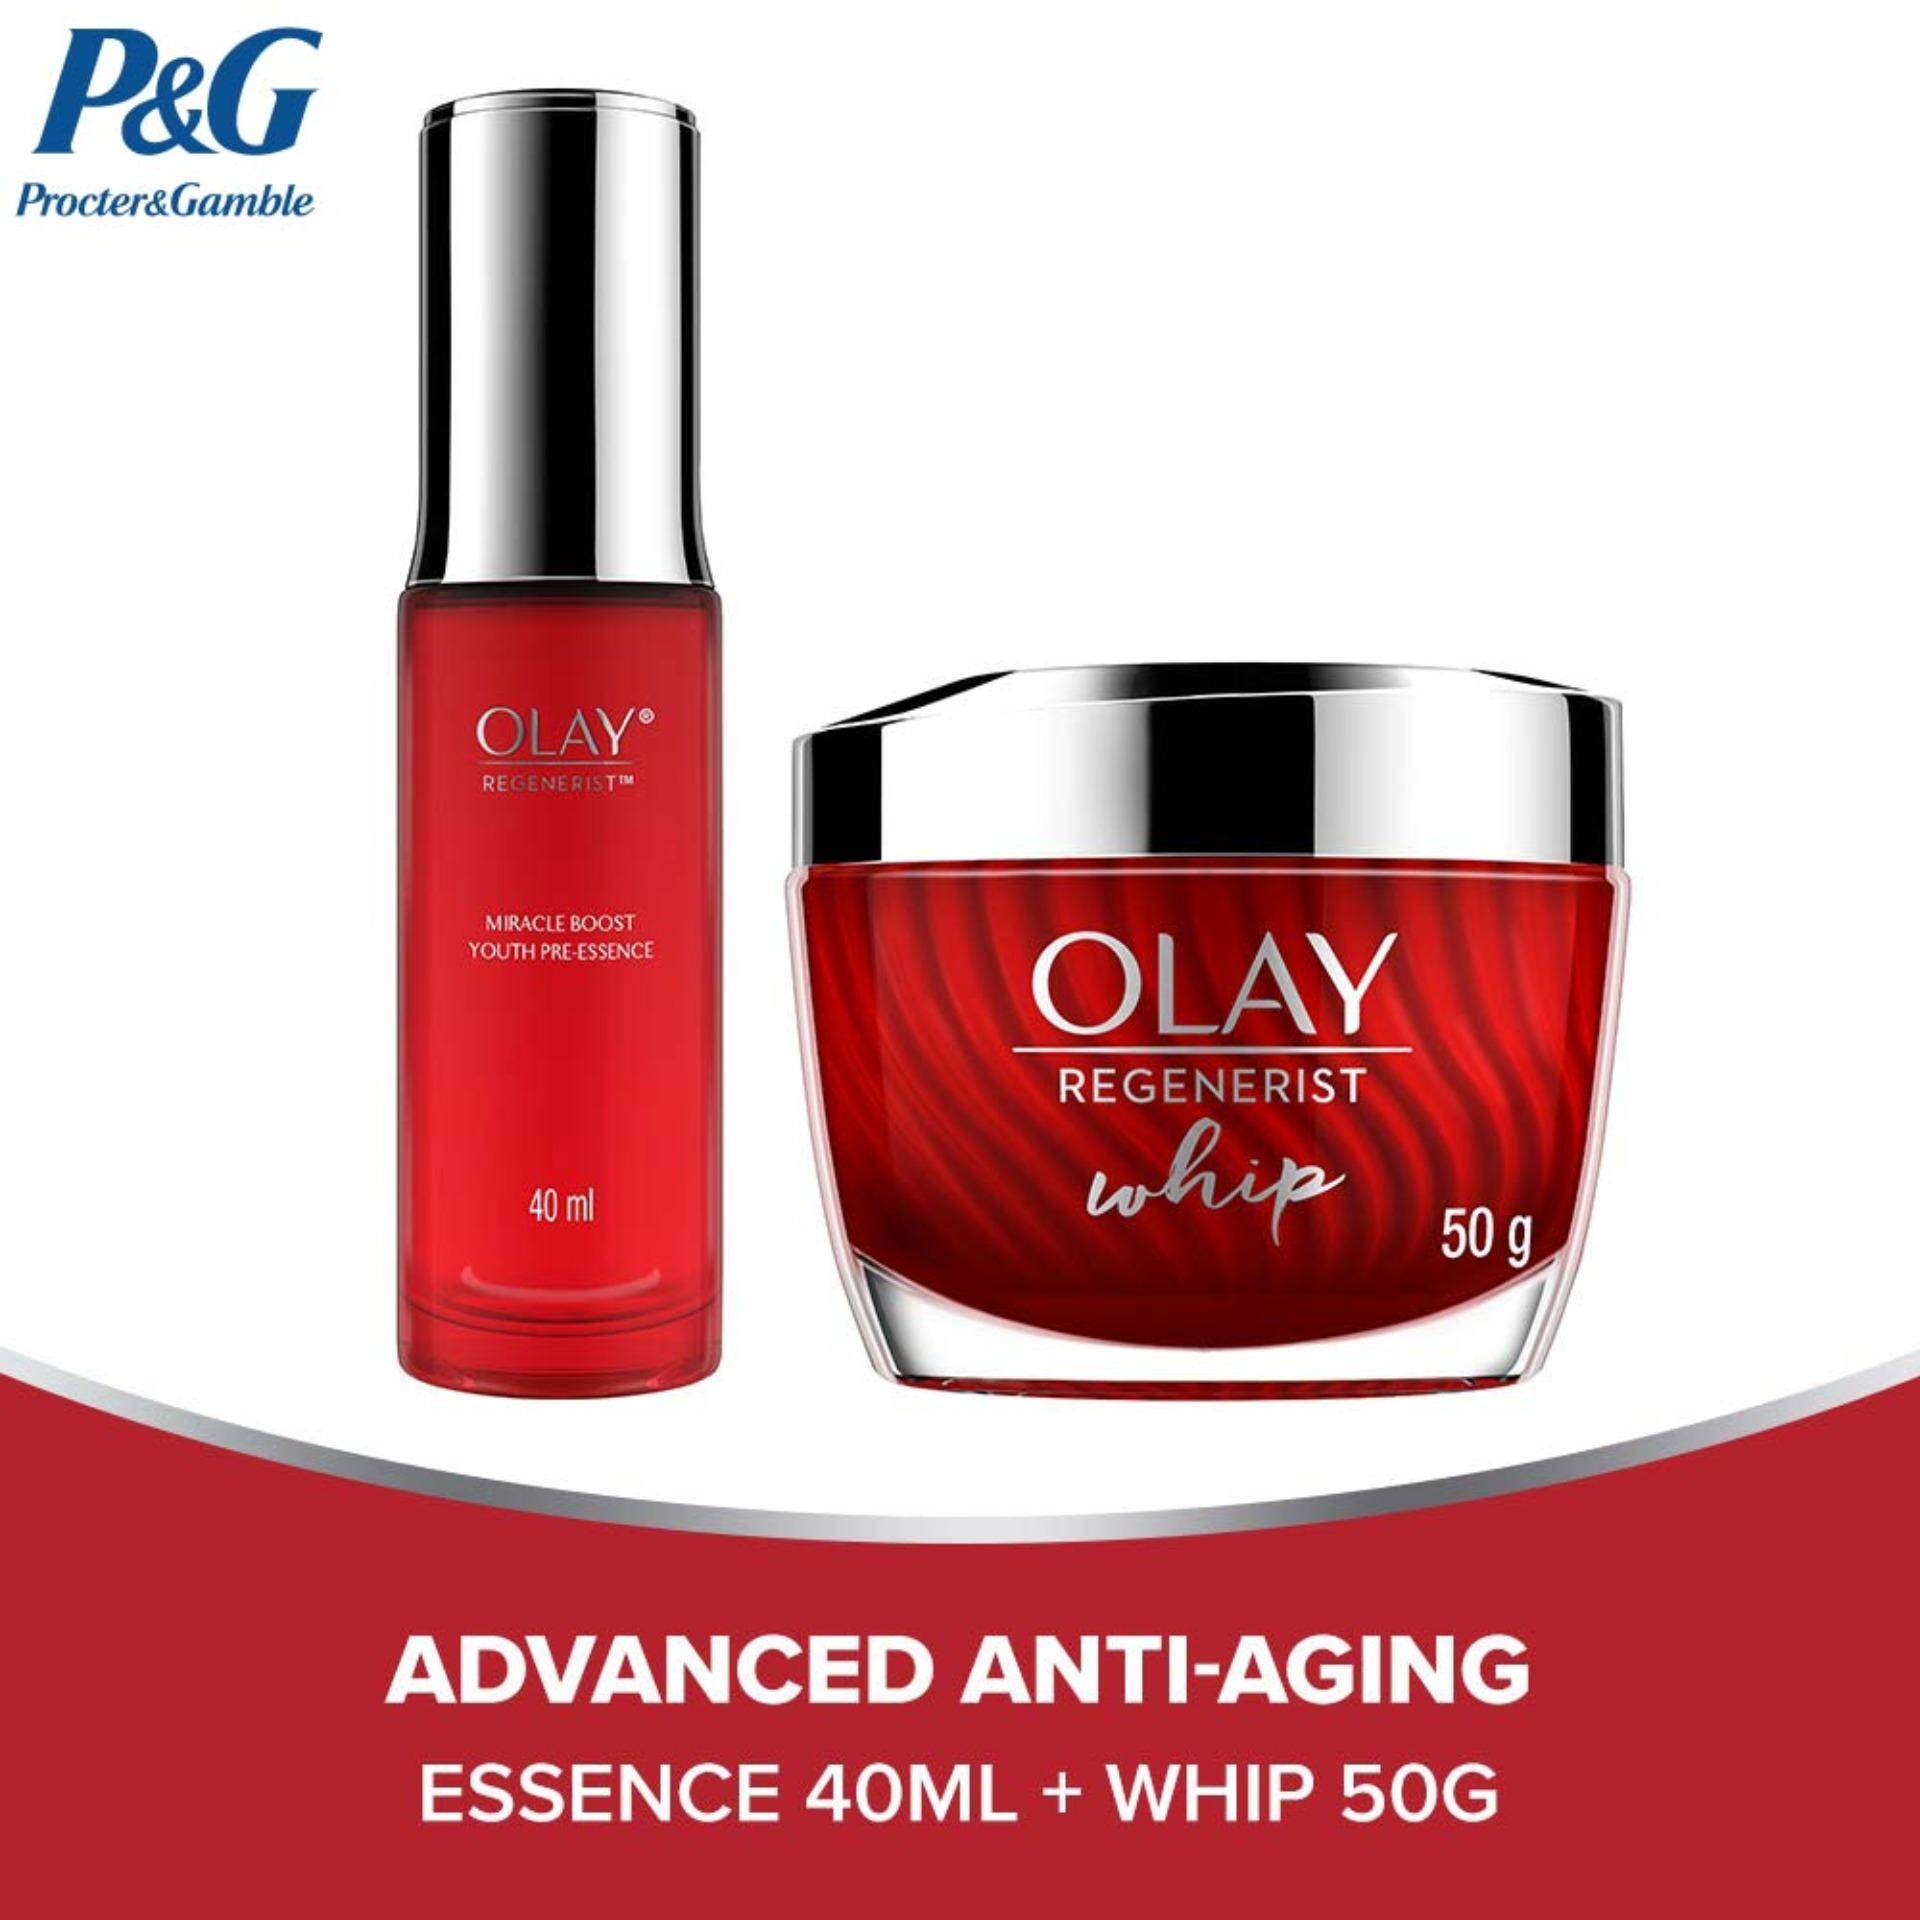 Olay Regenerist Miracle Boost Youth Pre-Essence 40ml and Whip 50g Set